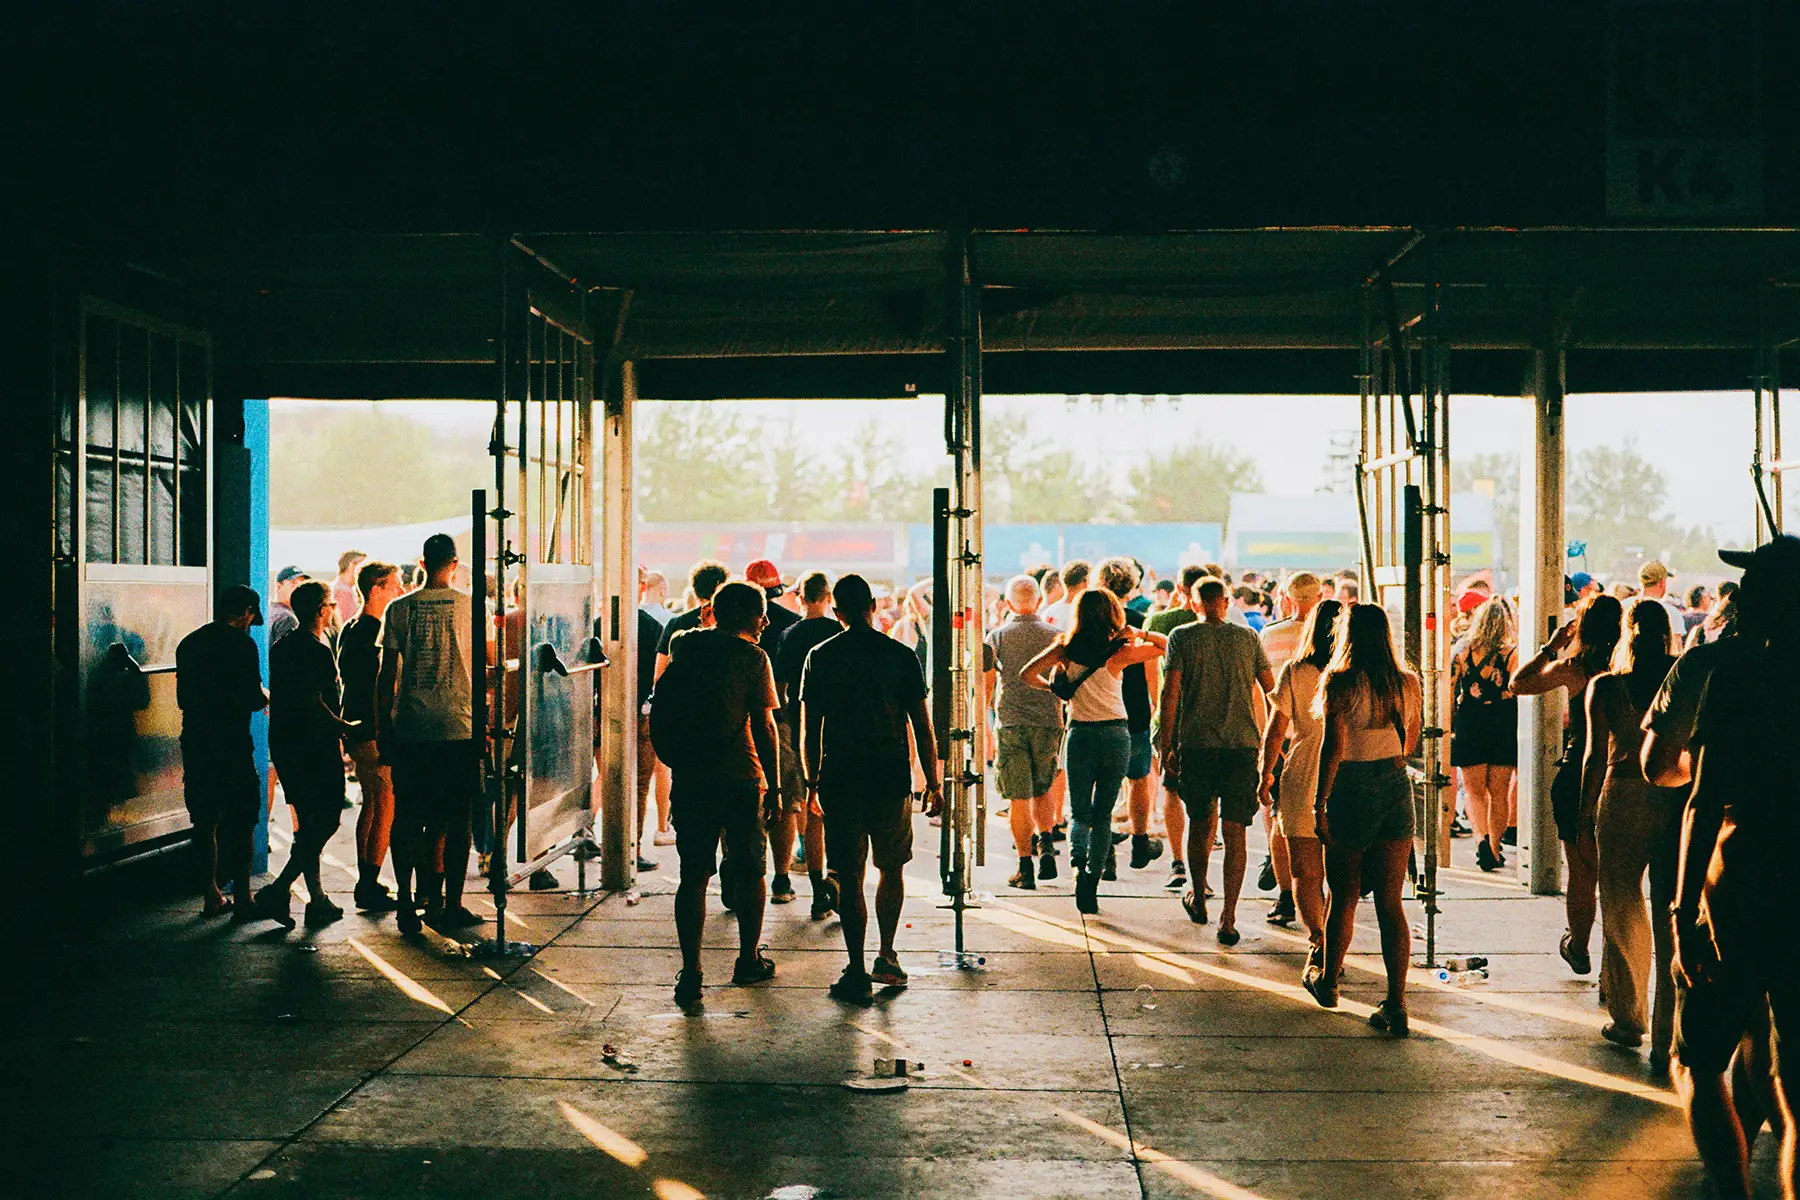 A crowd of people walk through large gates to a festival or large event/market